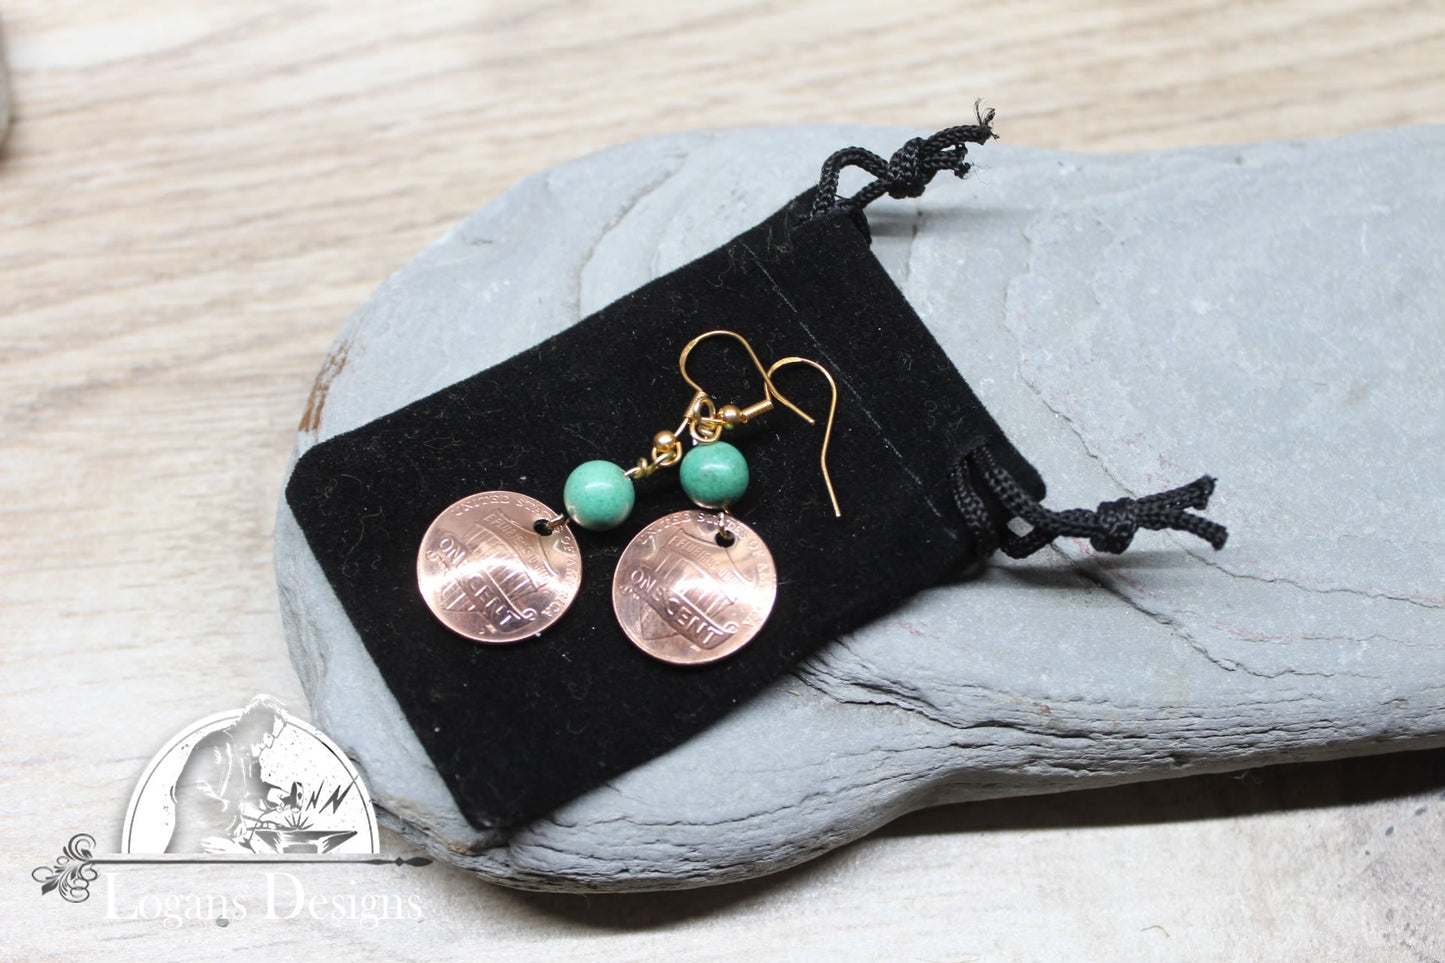 US Copper Penny | Domed US Penny Earrings | Birthday Gift | Coin Jewelry | Penny Jewelry Unique Gift L8076